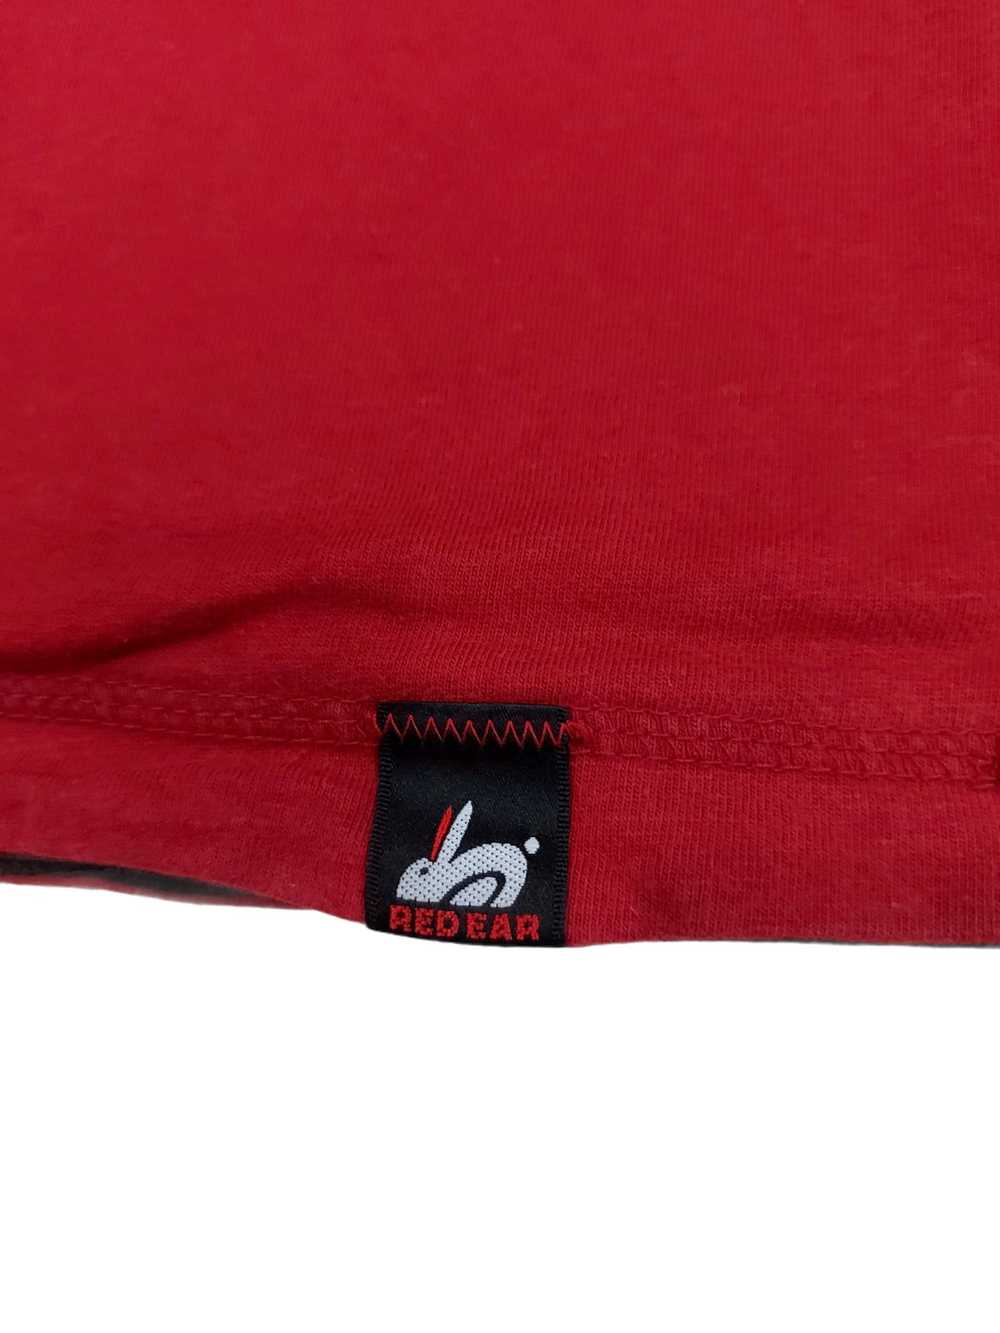 RARE! VTG PAUL SMITH RED EAR REVERSIBLE EMBROIDER… - image 9